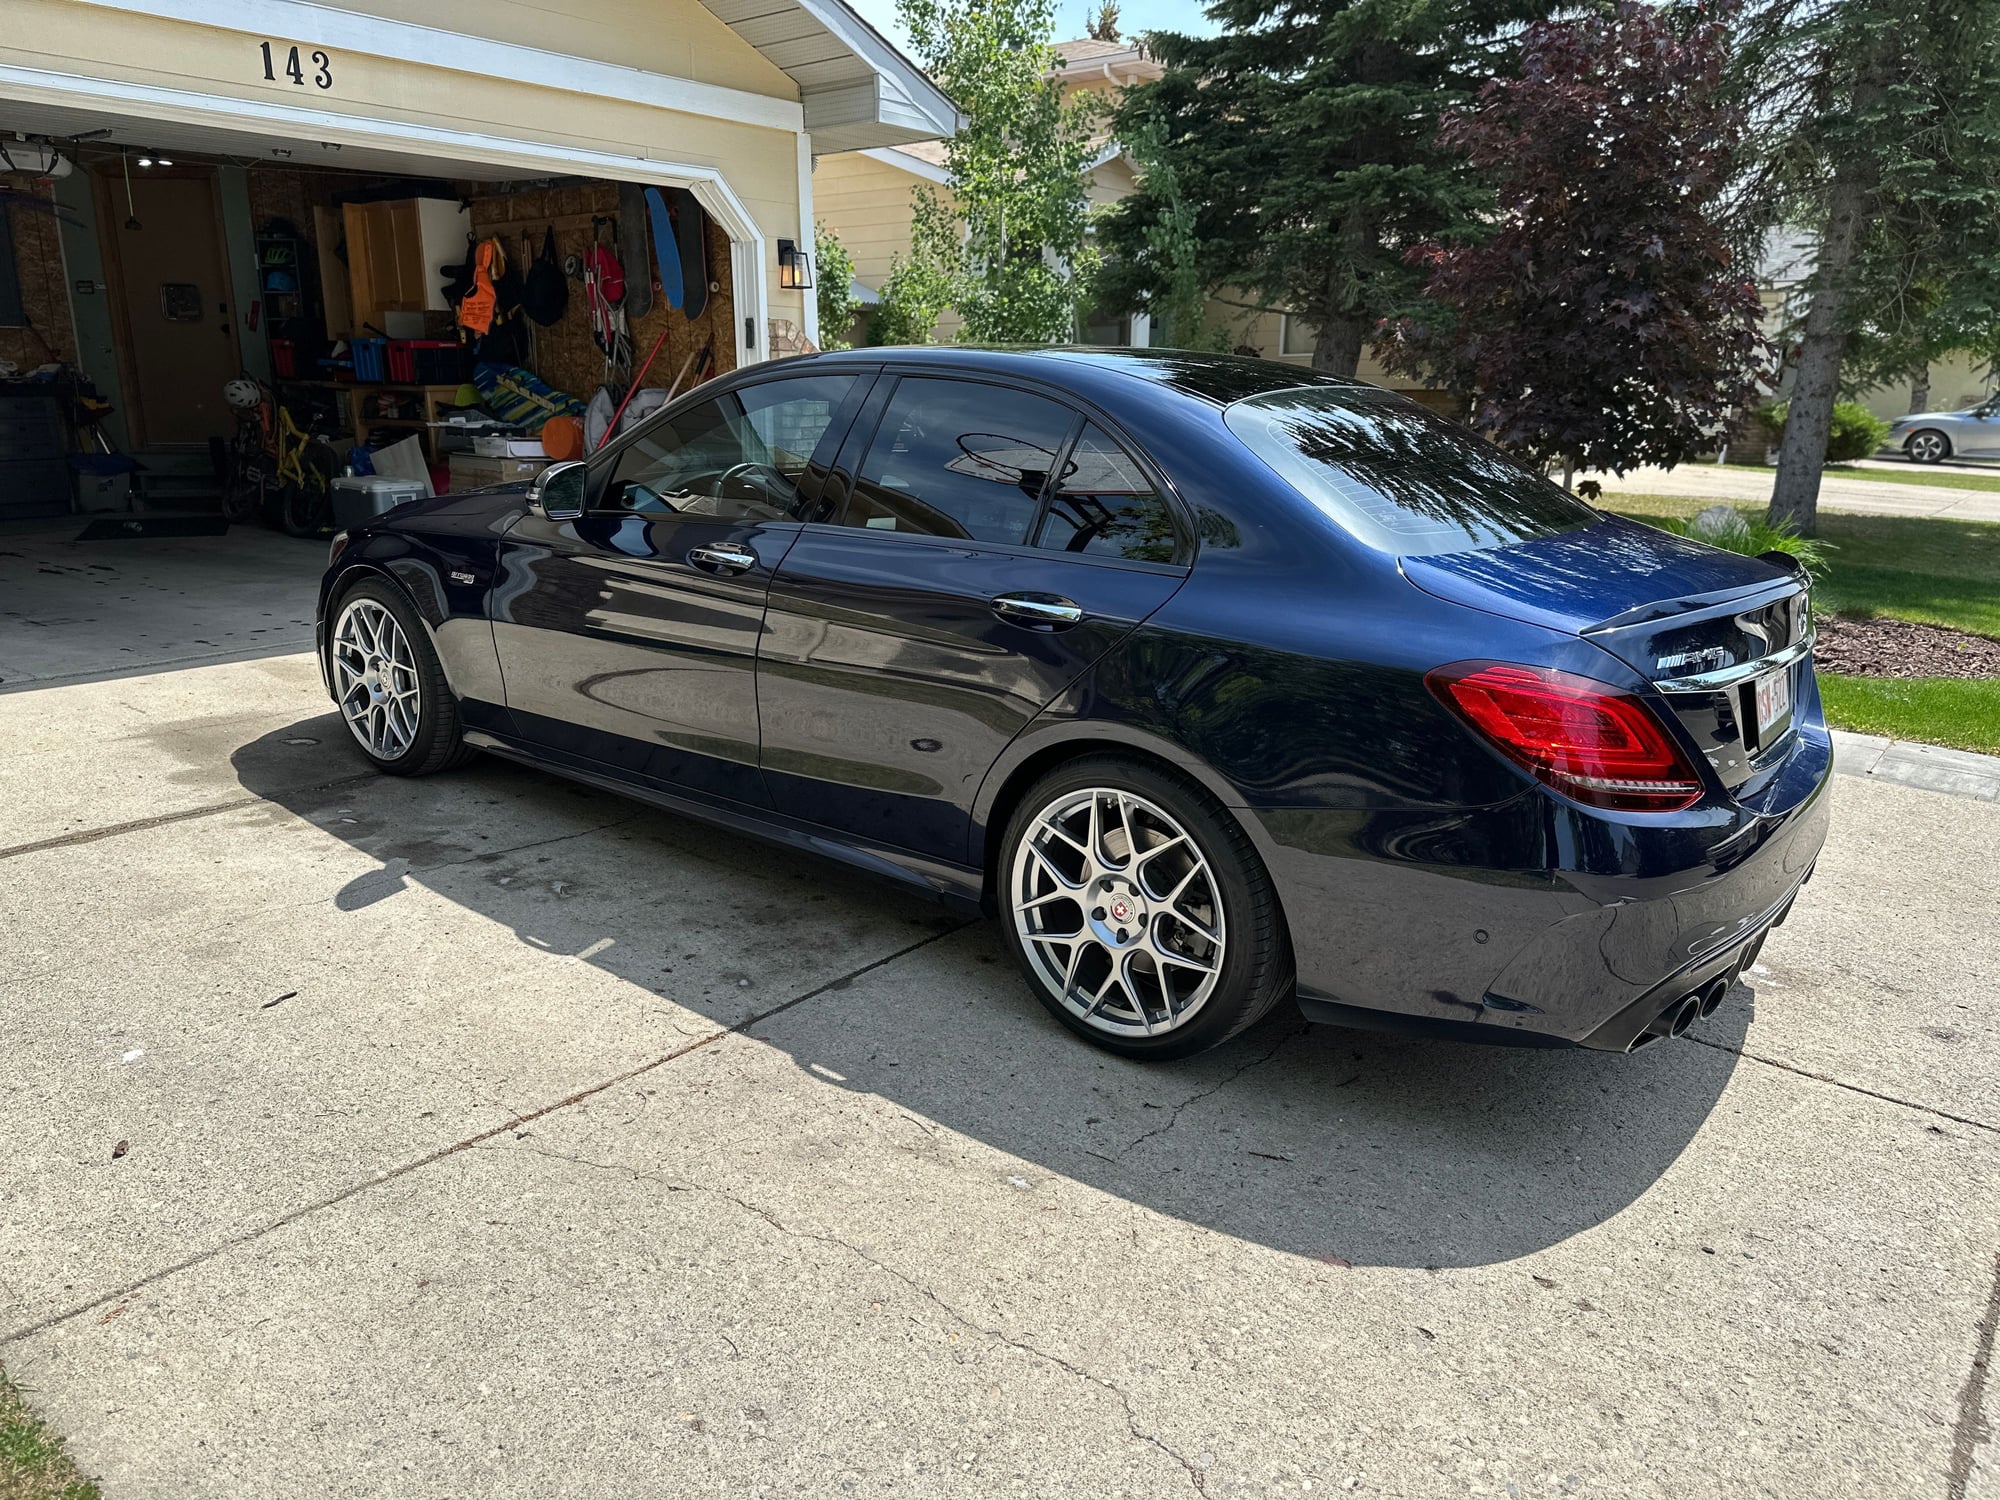 Wheels and Tires/Axles - HRE FF01 - 19’ C43 wheels for sale w/ spacers - Used - 2019 to 2022 Mercedes-Benz C43 AMG - Calgary, AB T2X2T2, Canada